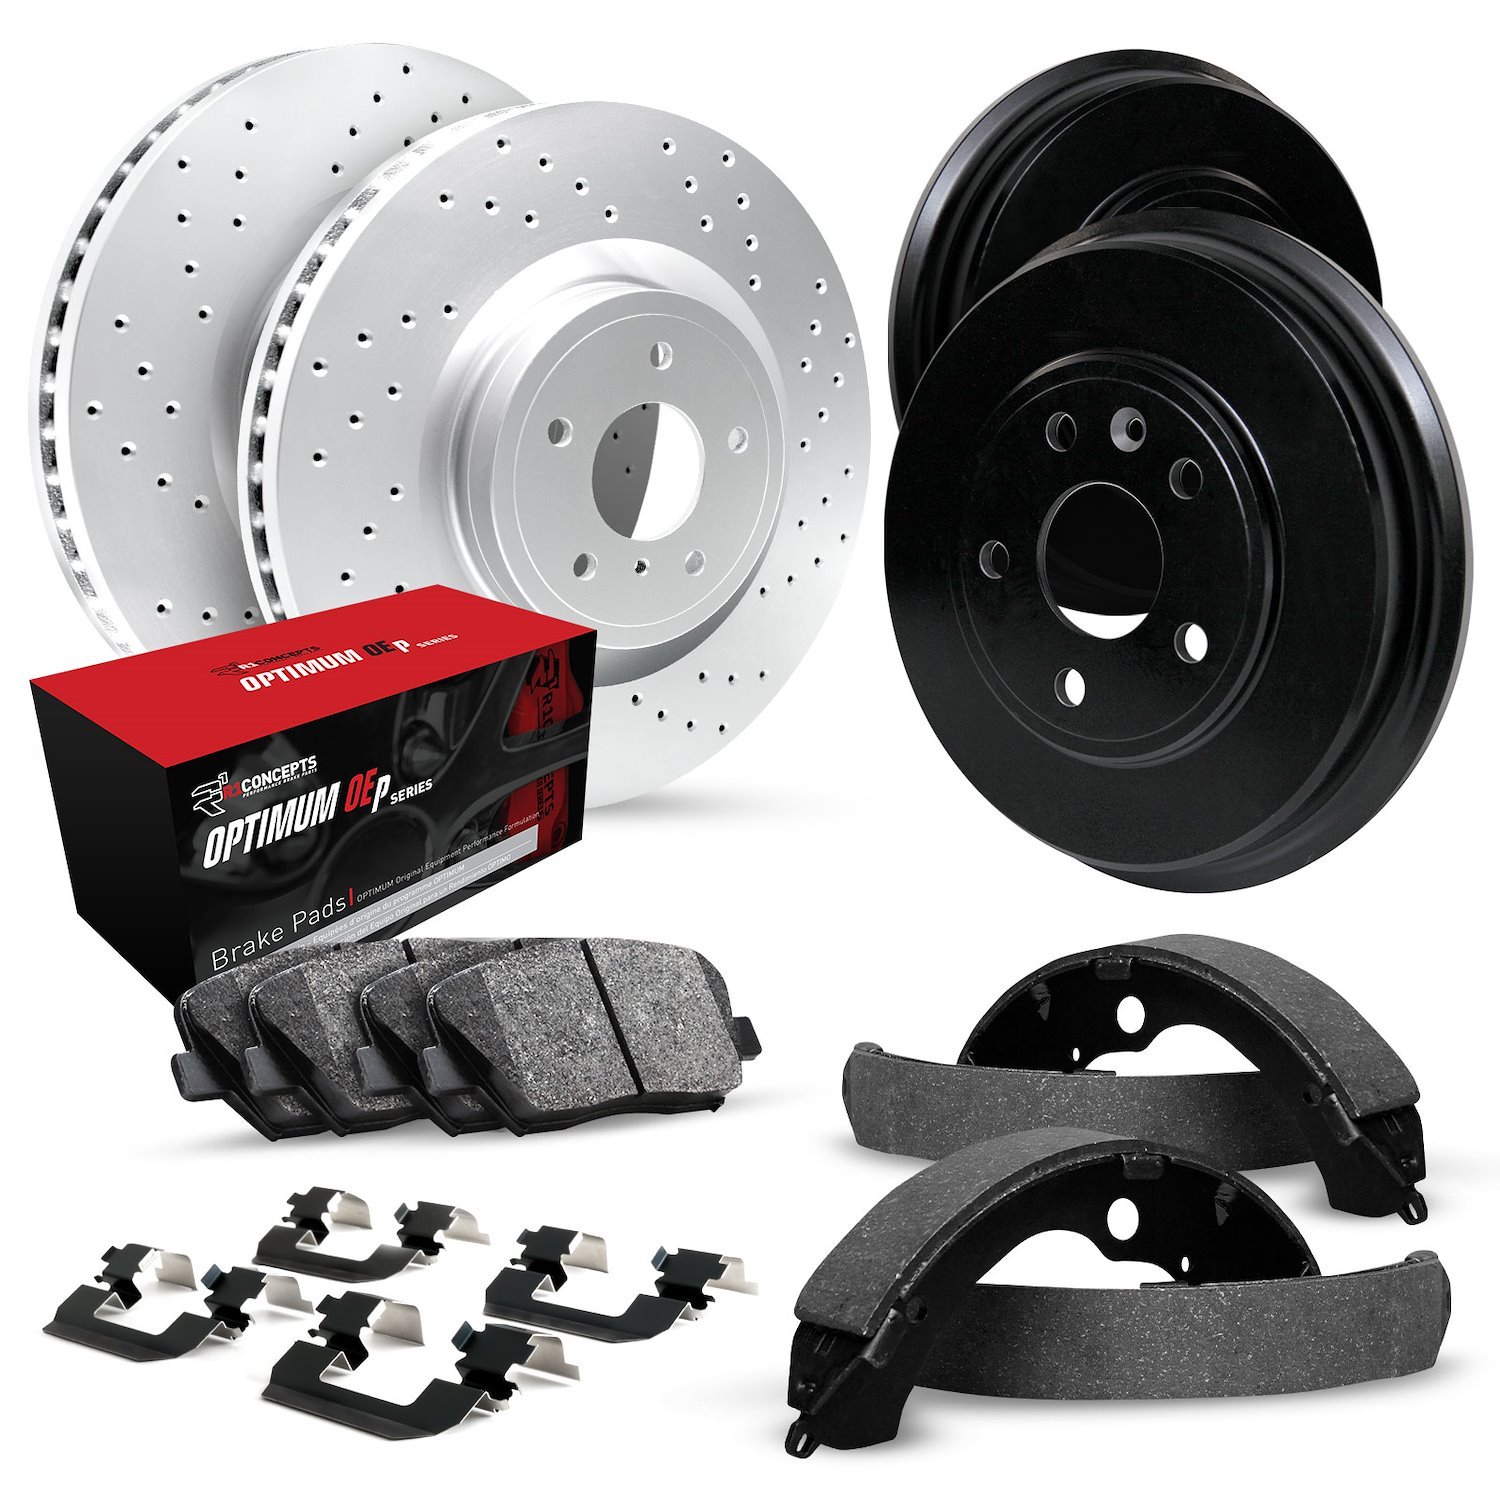 GEO-Carbon Drilled Brake Rotor & Drum Set w/Optimum OE Pads, Shoes, & Hardware, 1978-1980 GM, Position: Front & Rear